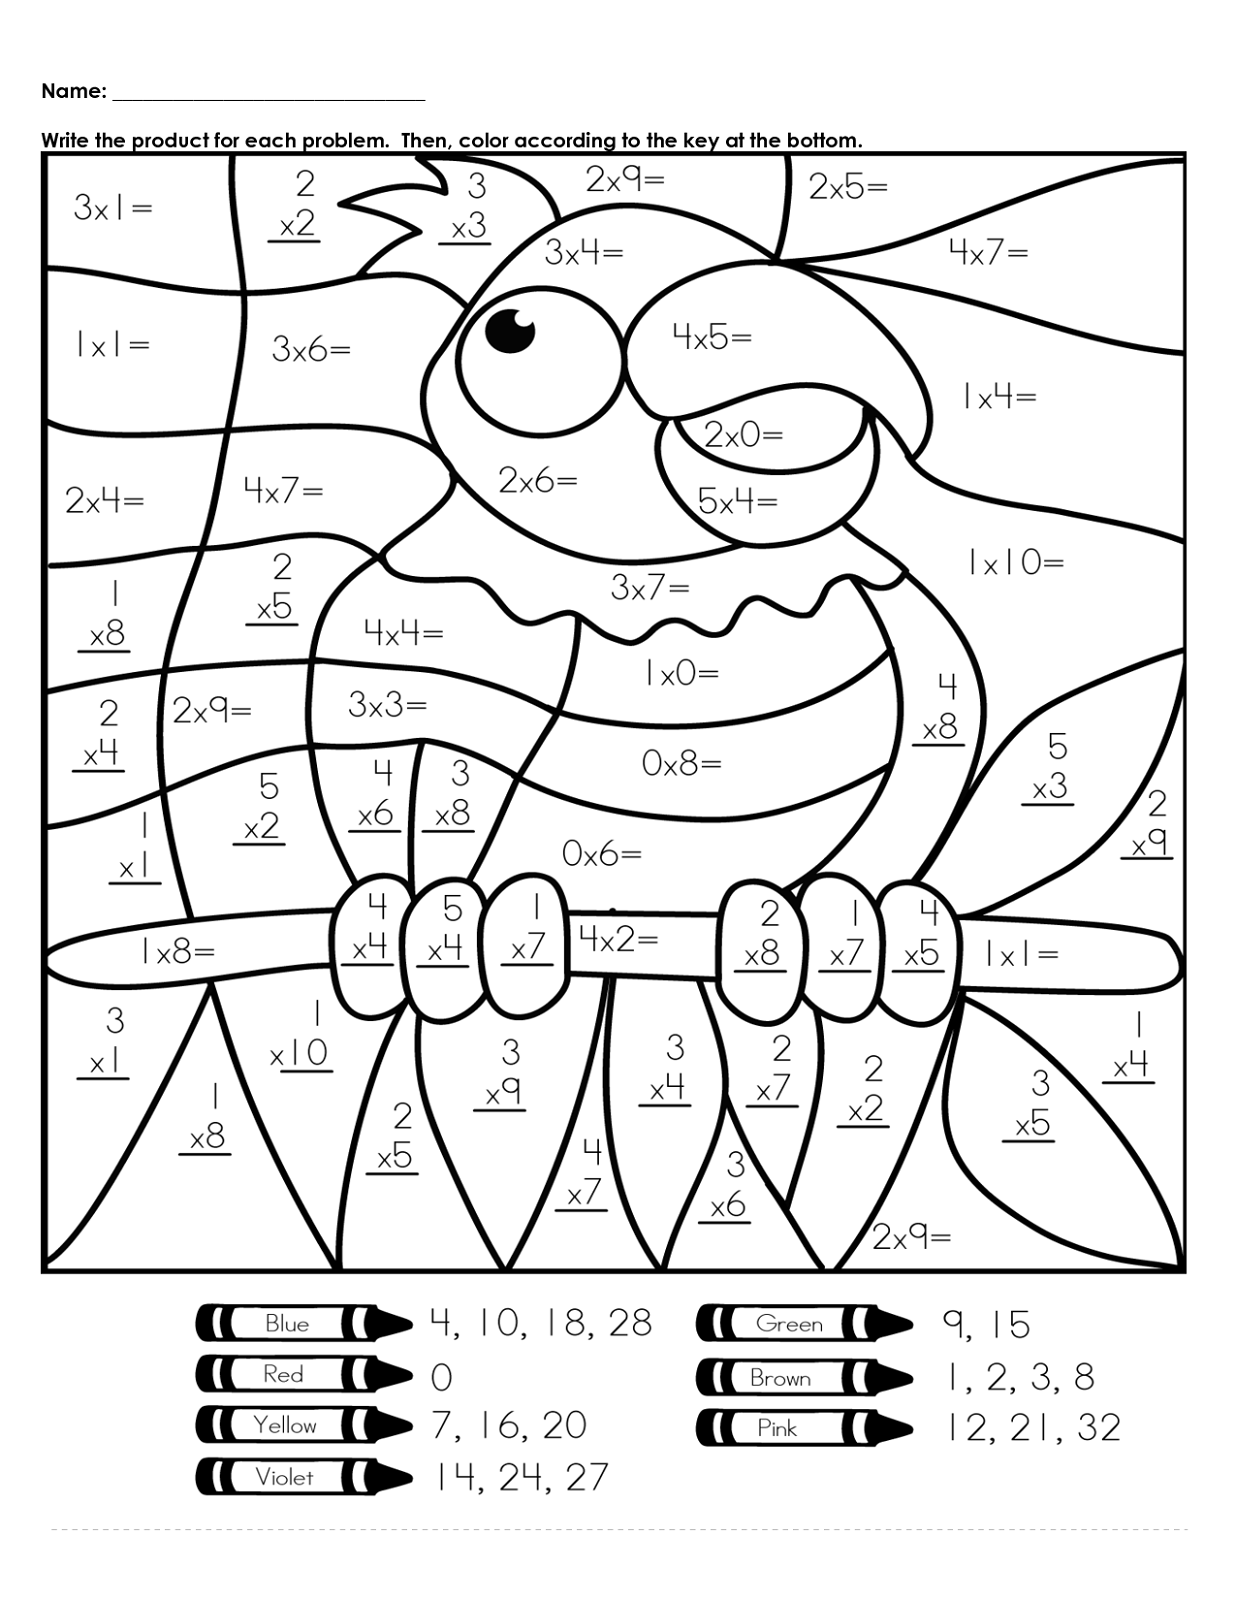 coloring by number worksheets free disney color by number printables disney coloring number coloring worksheets by 